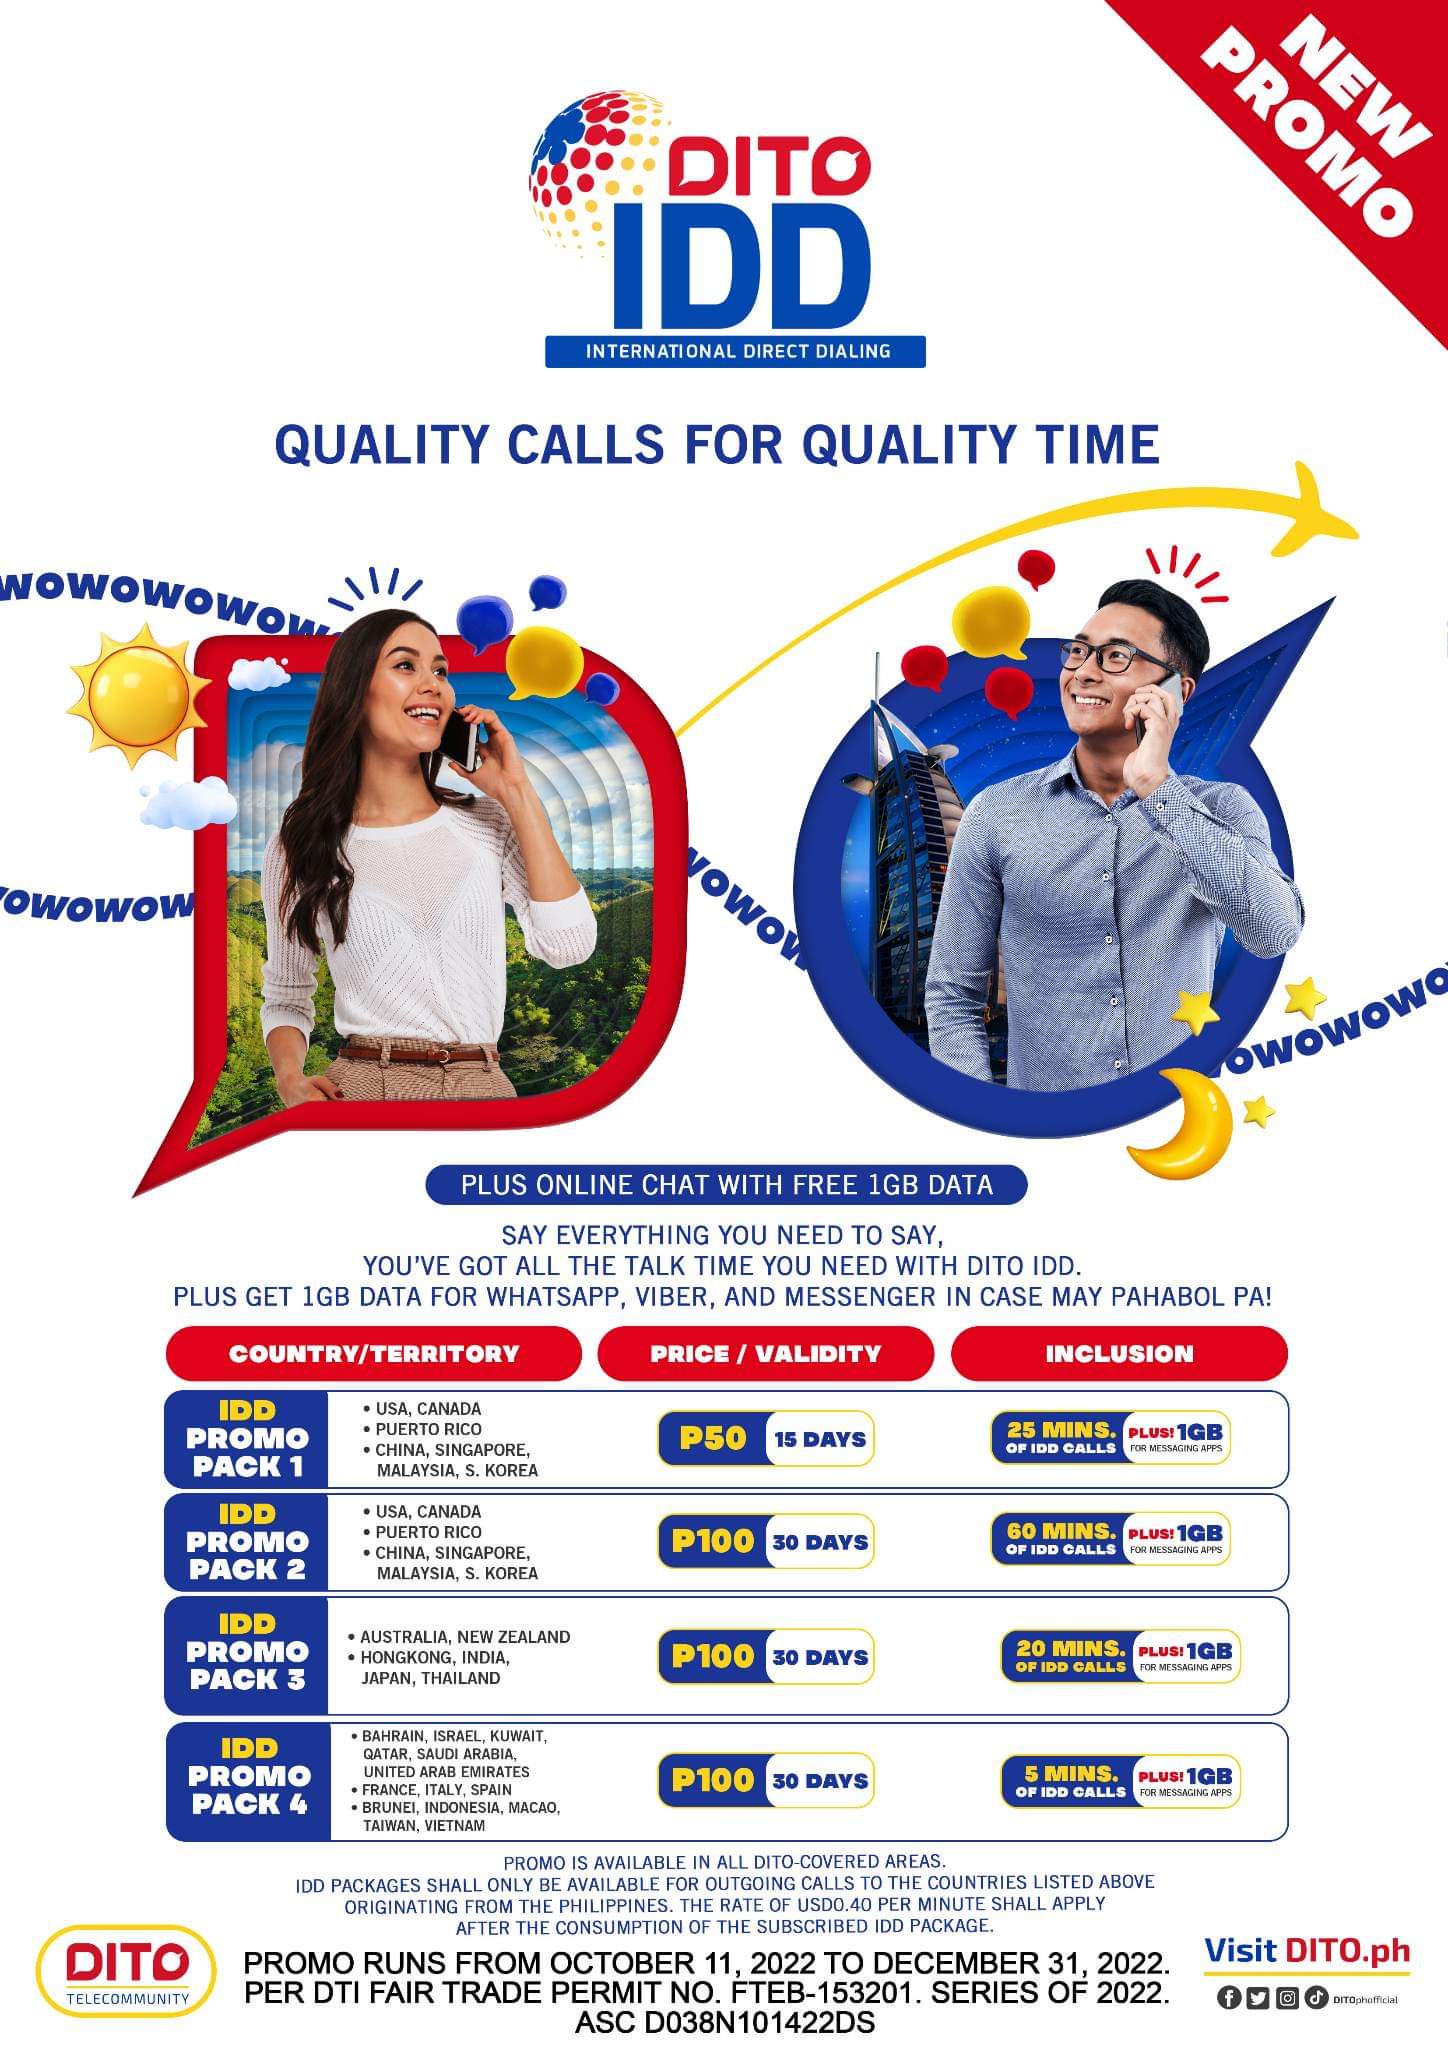 DITO launches affordable international service promo packs to connect Filipinos around the world